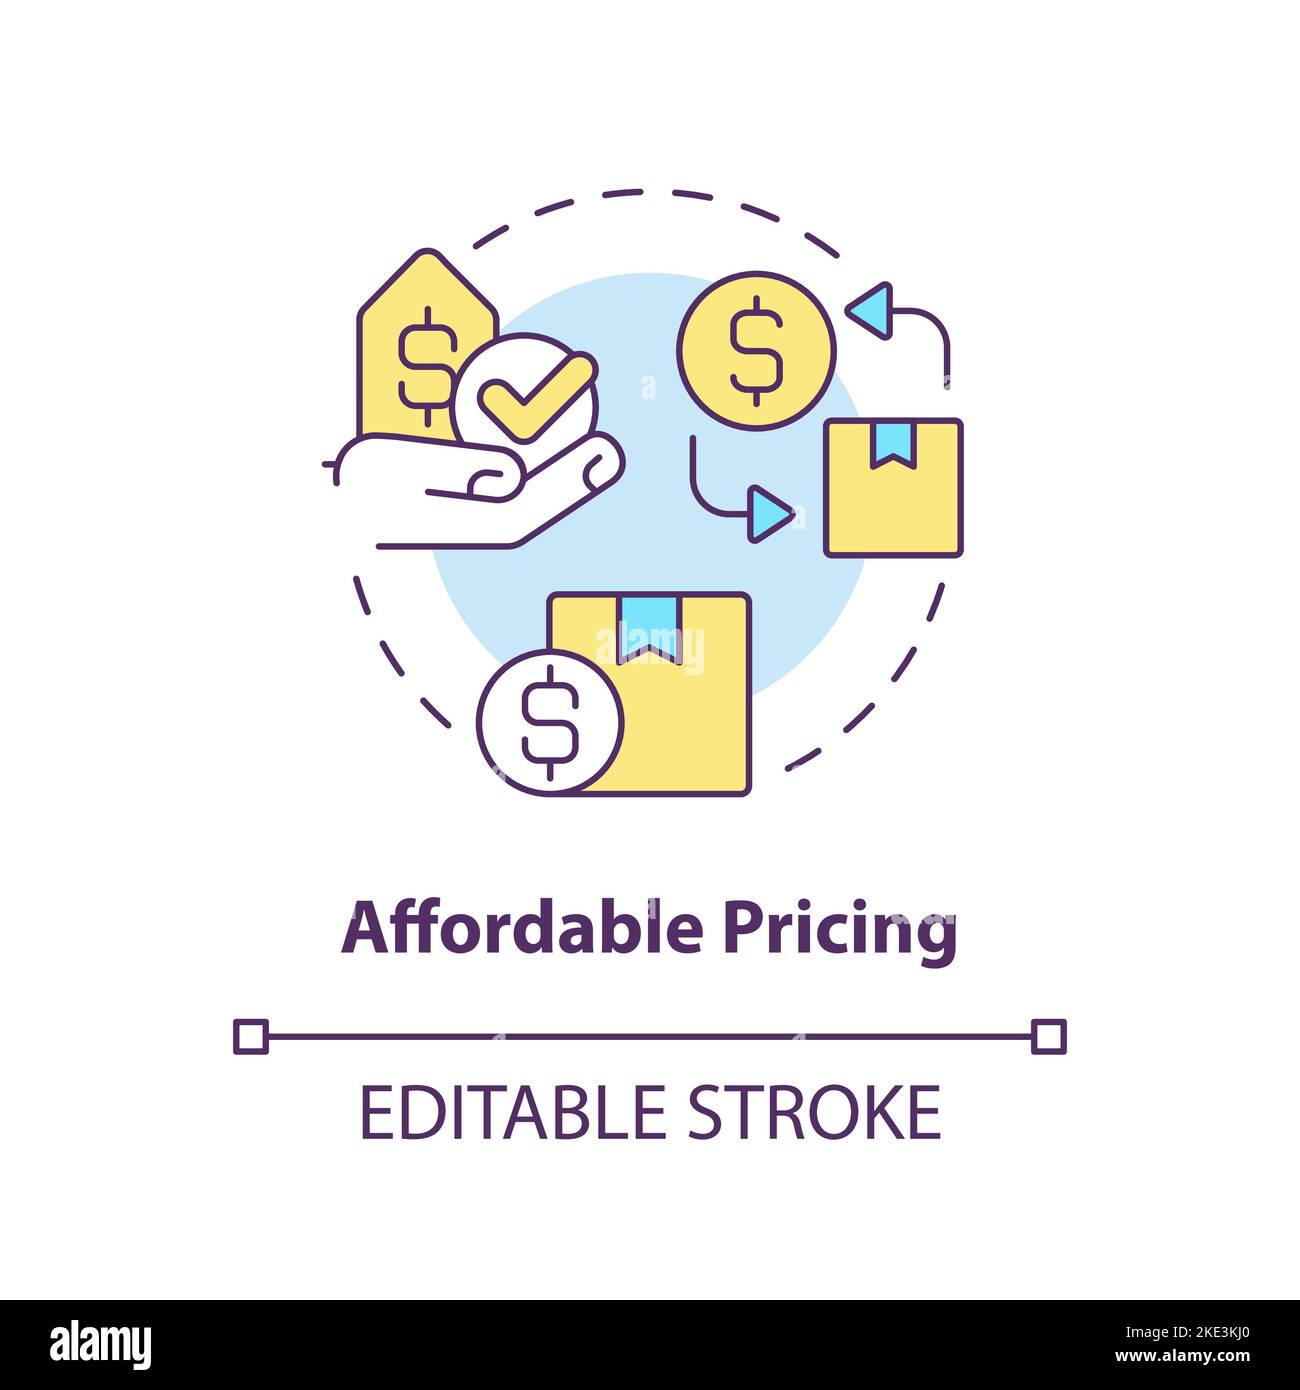 Affordable pricing concept icon Stock Vector